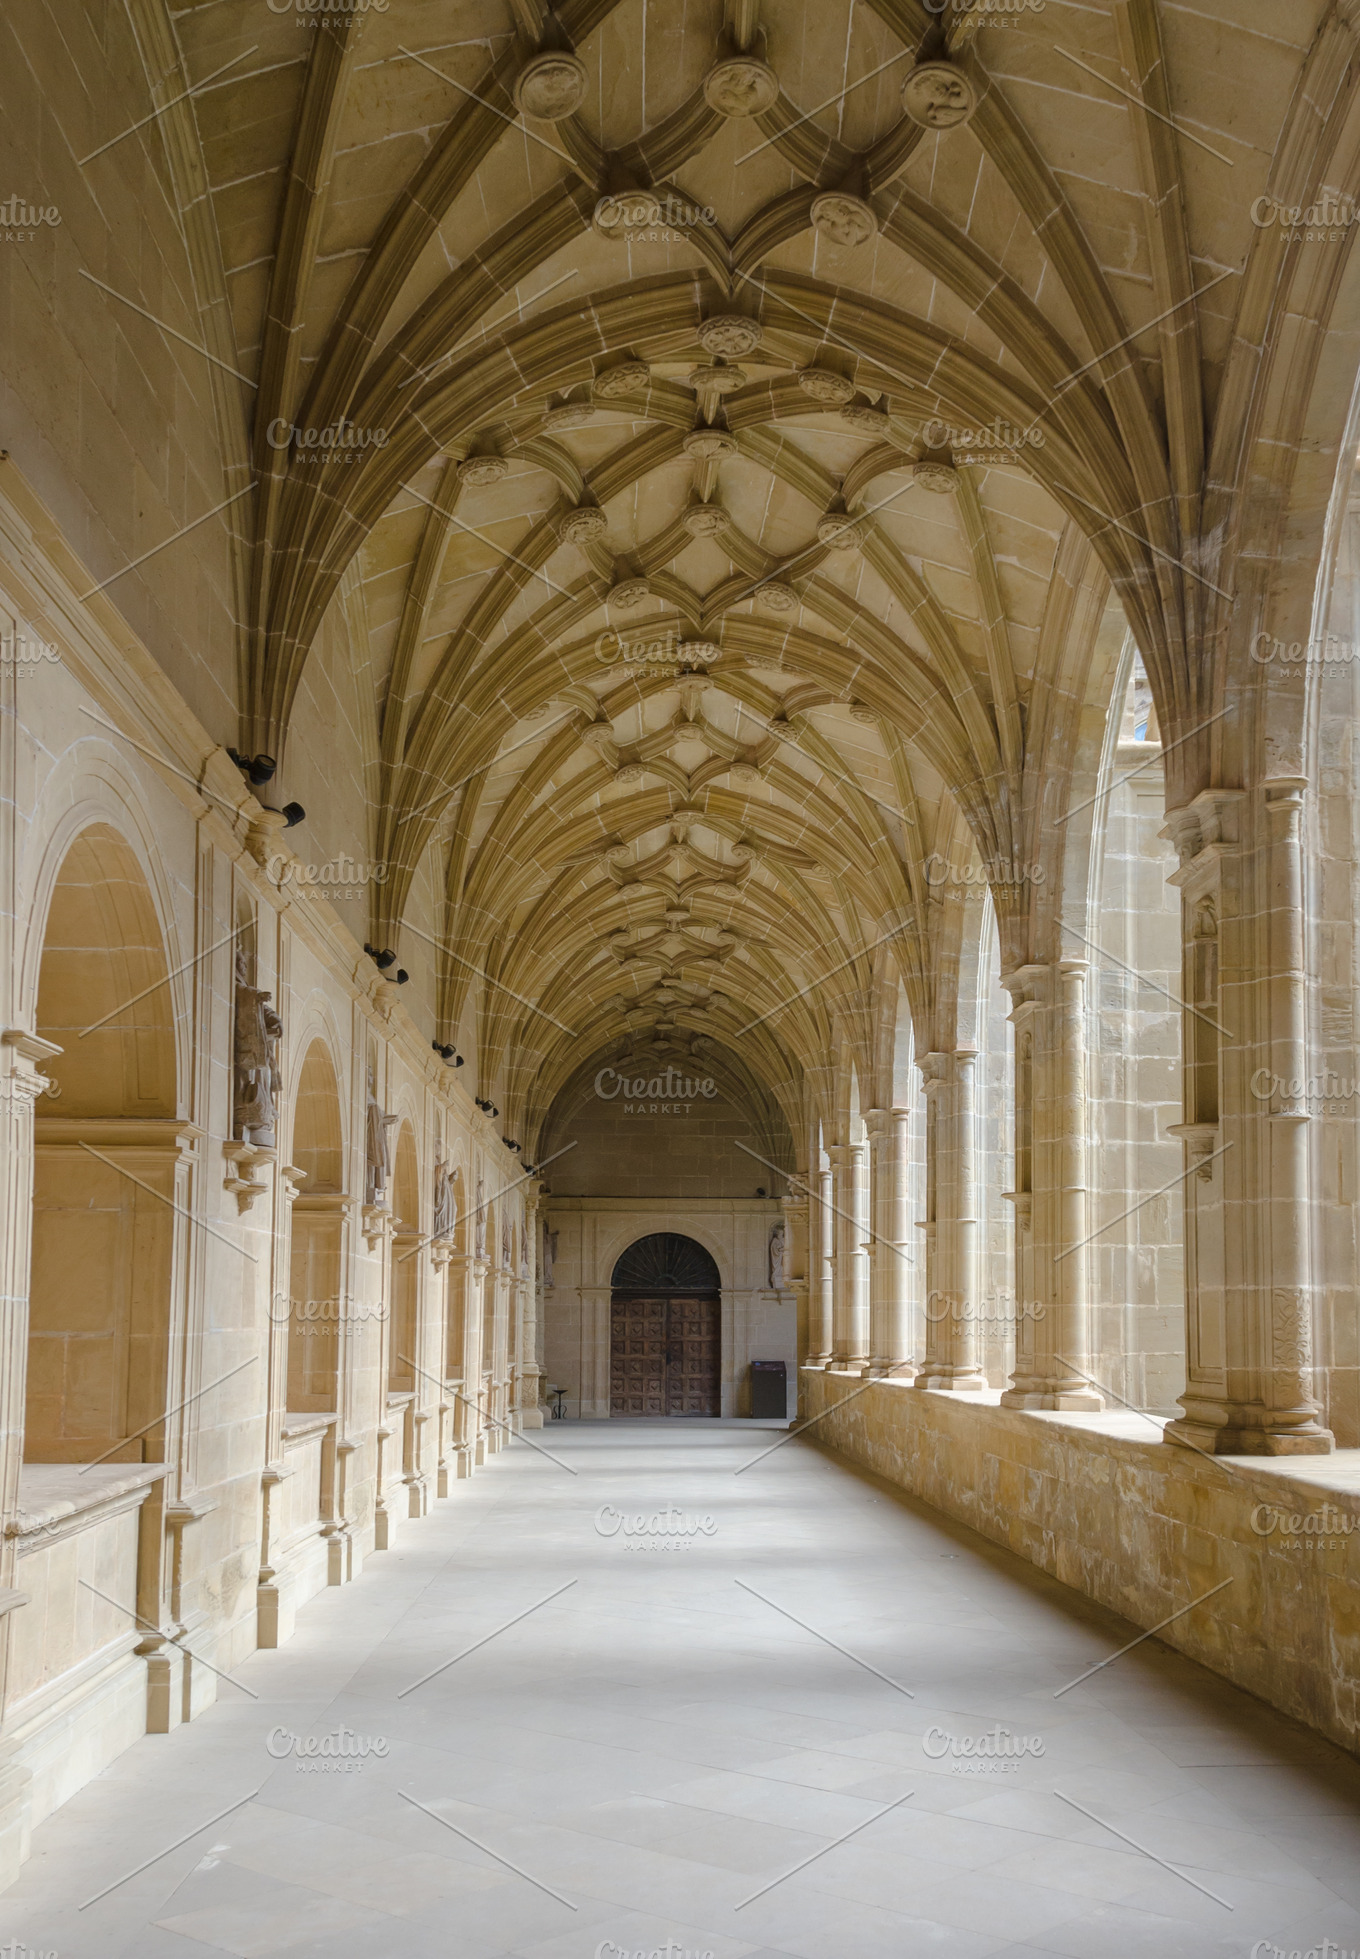 Medieval cloister in monastery ~ Architecture Photos ~ Creative Market